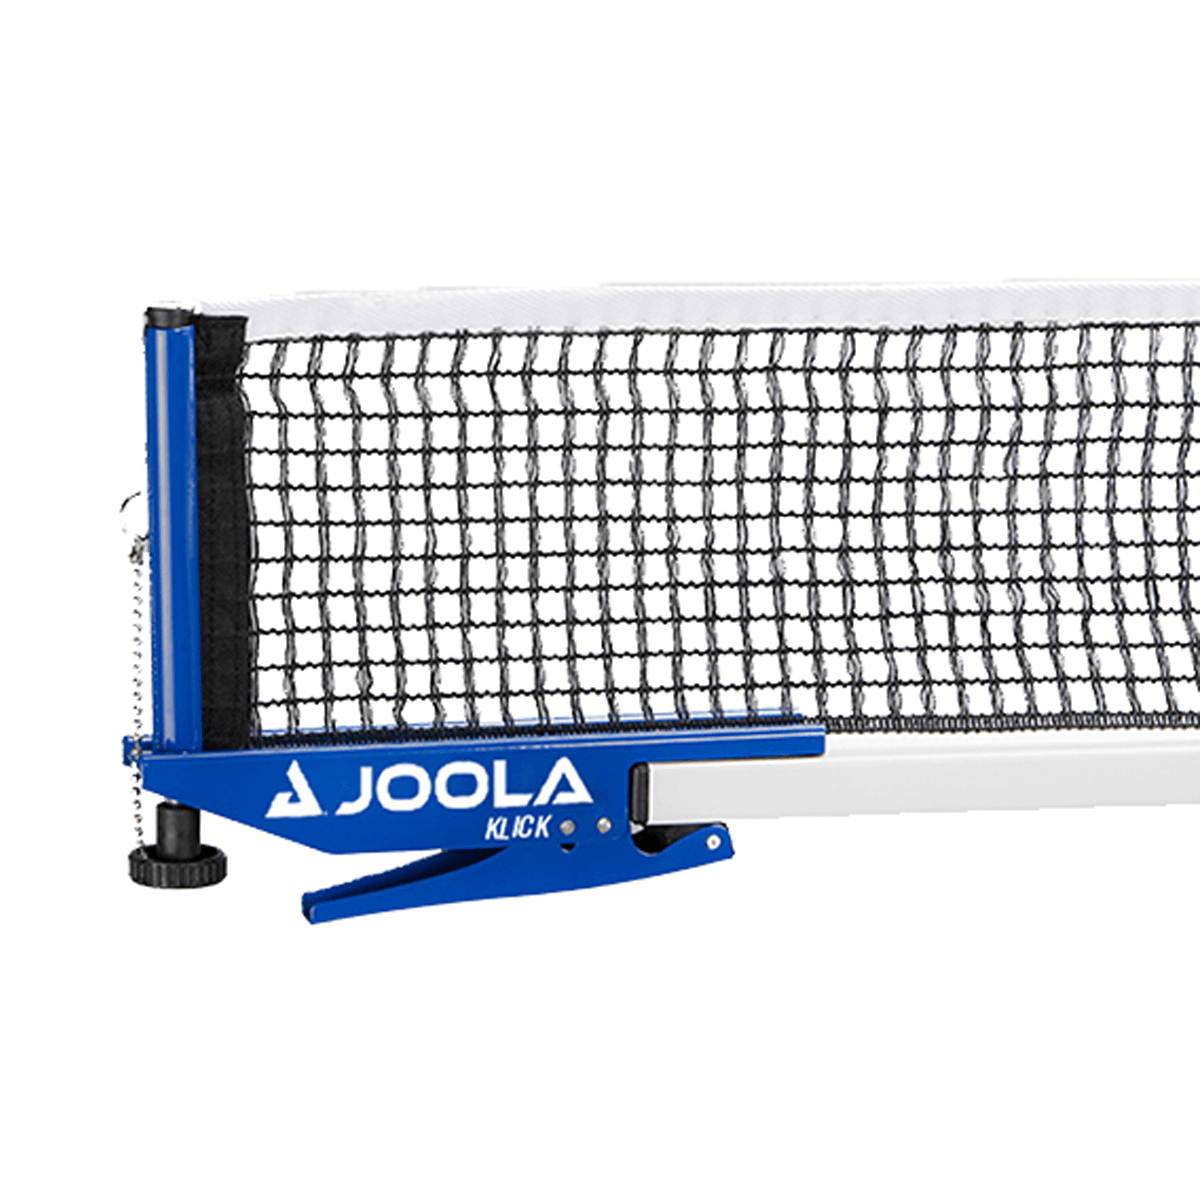 JOOLA Klick Professional Table Tennis Net and Post Set with Carrying Case